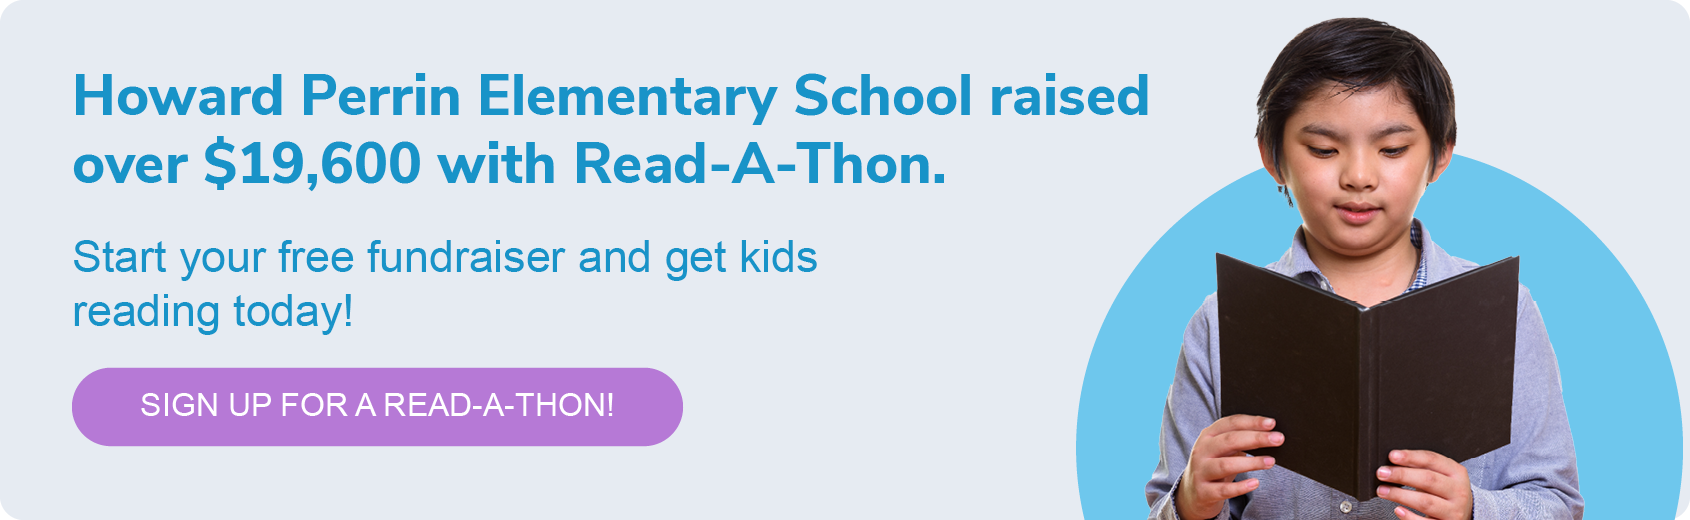 Sign up for a free Read-A-Thon elementary school fundraiser and start raising thousands of dollars today.